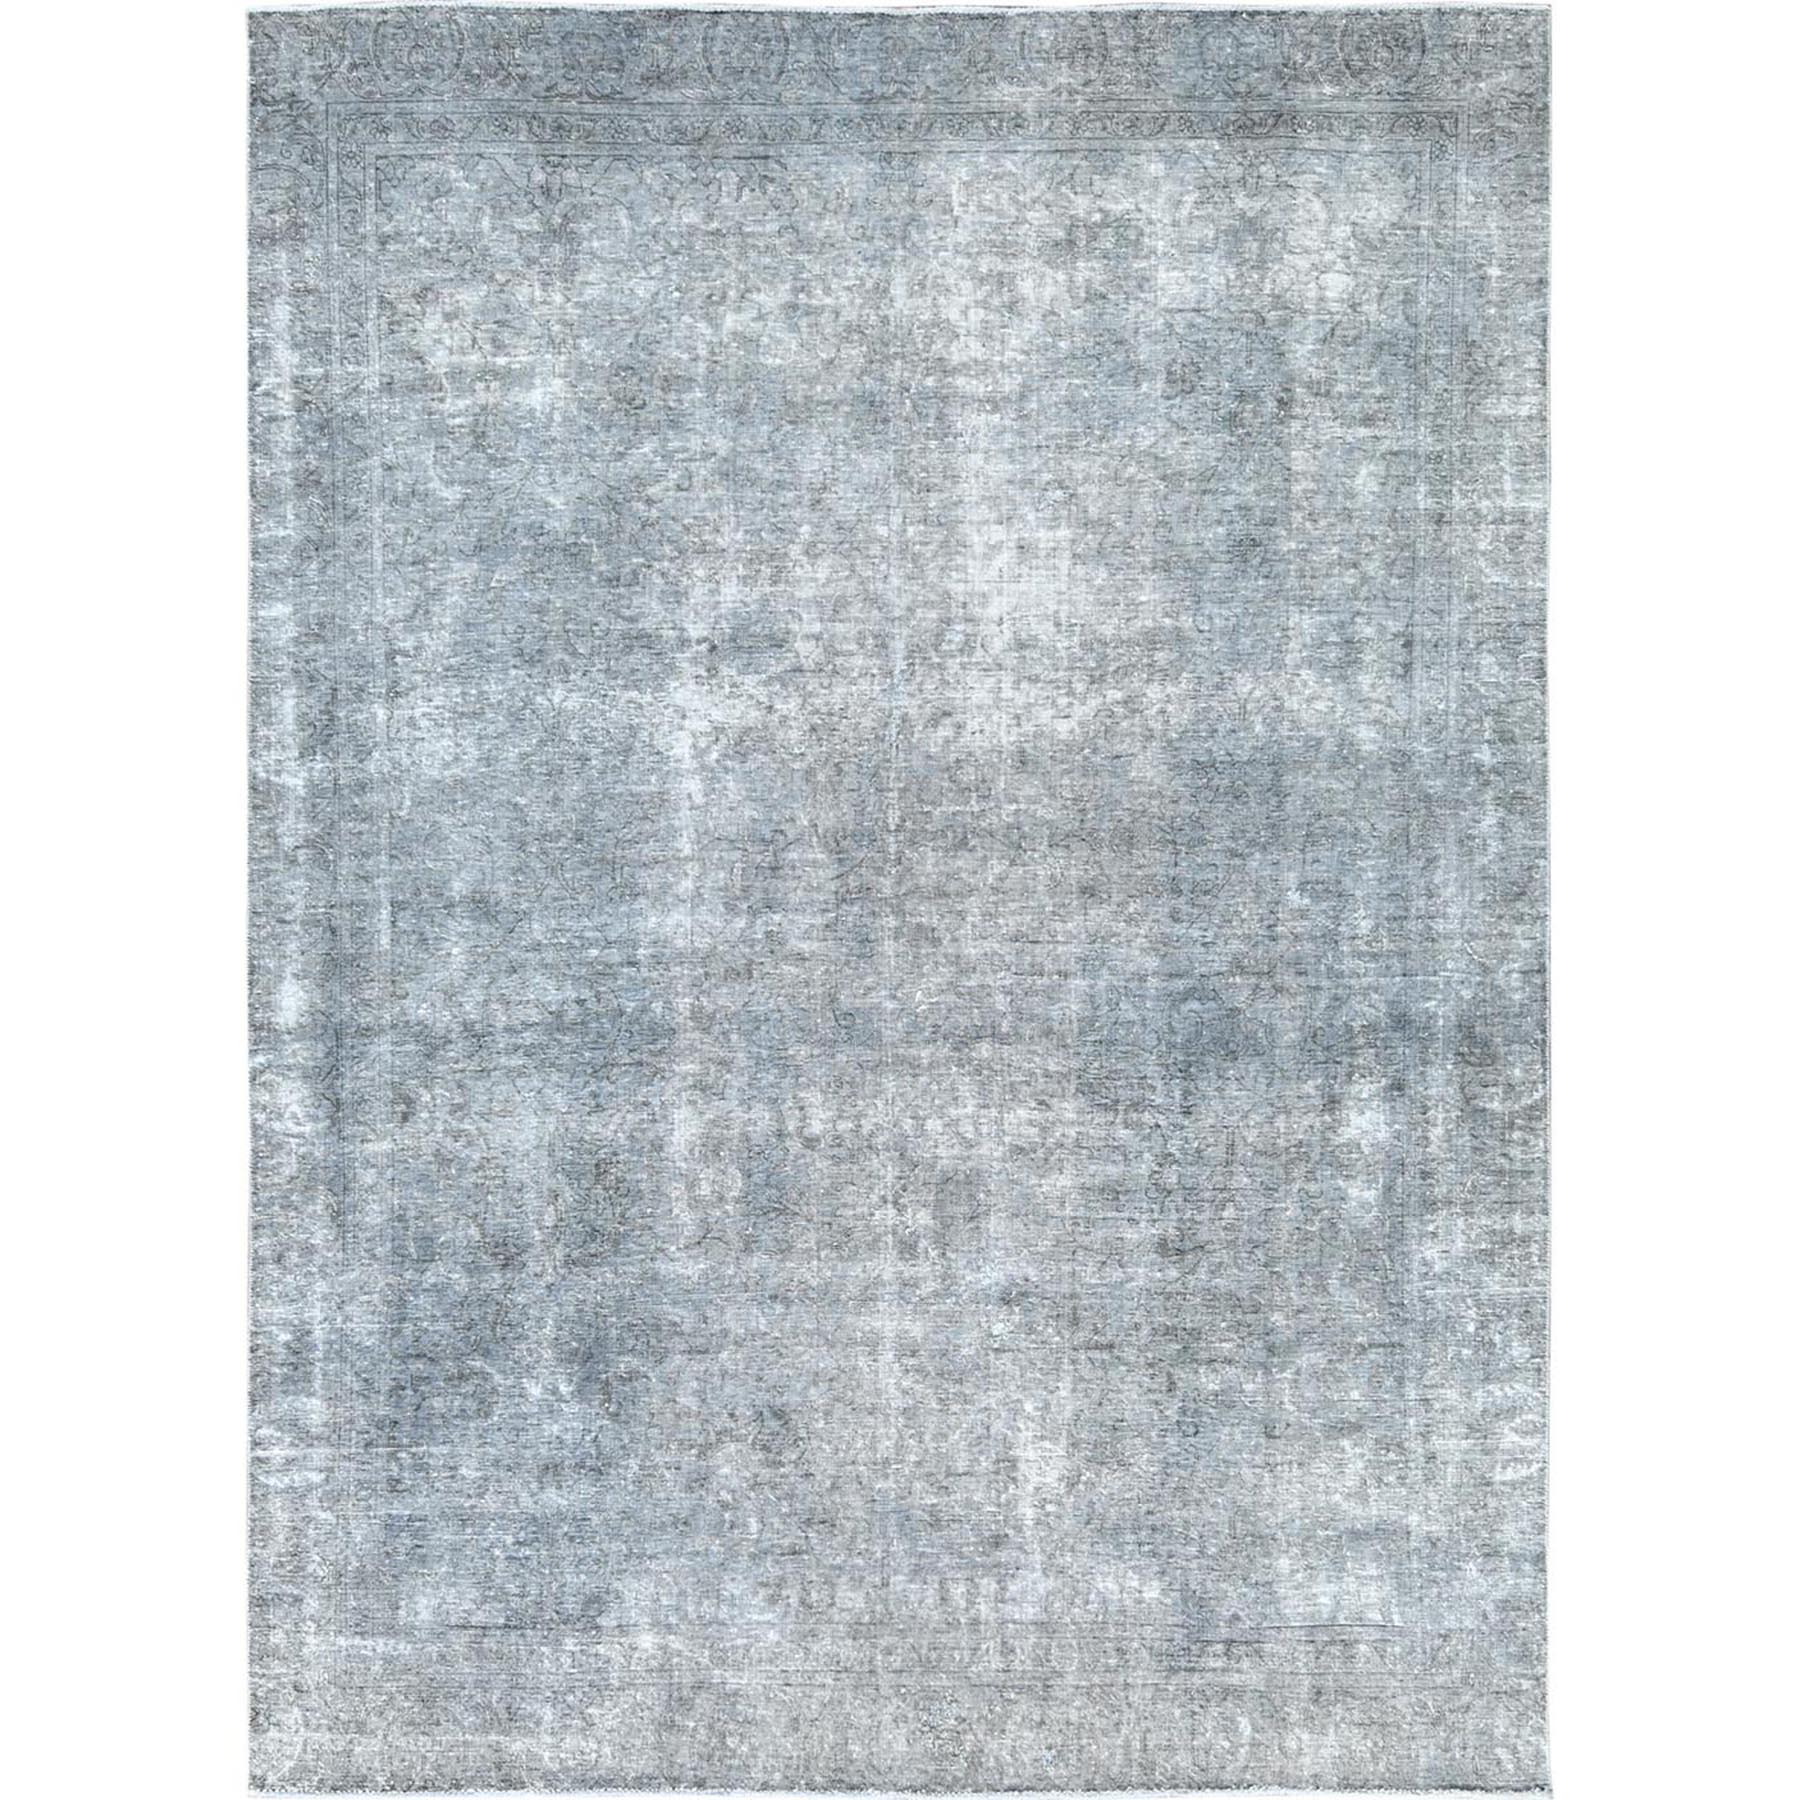  Wool Hand-Knotted Area Rug 8'4